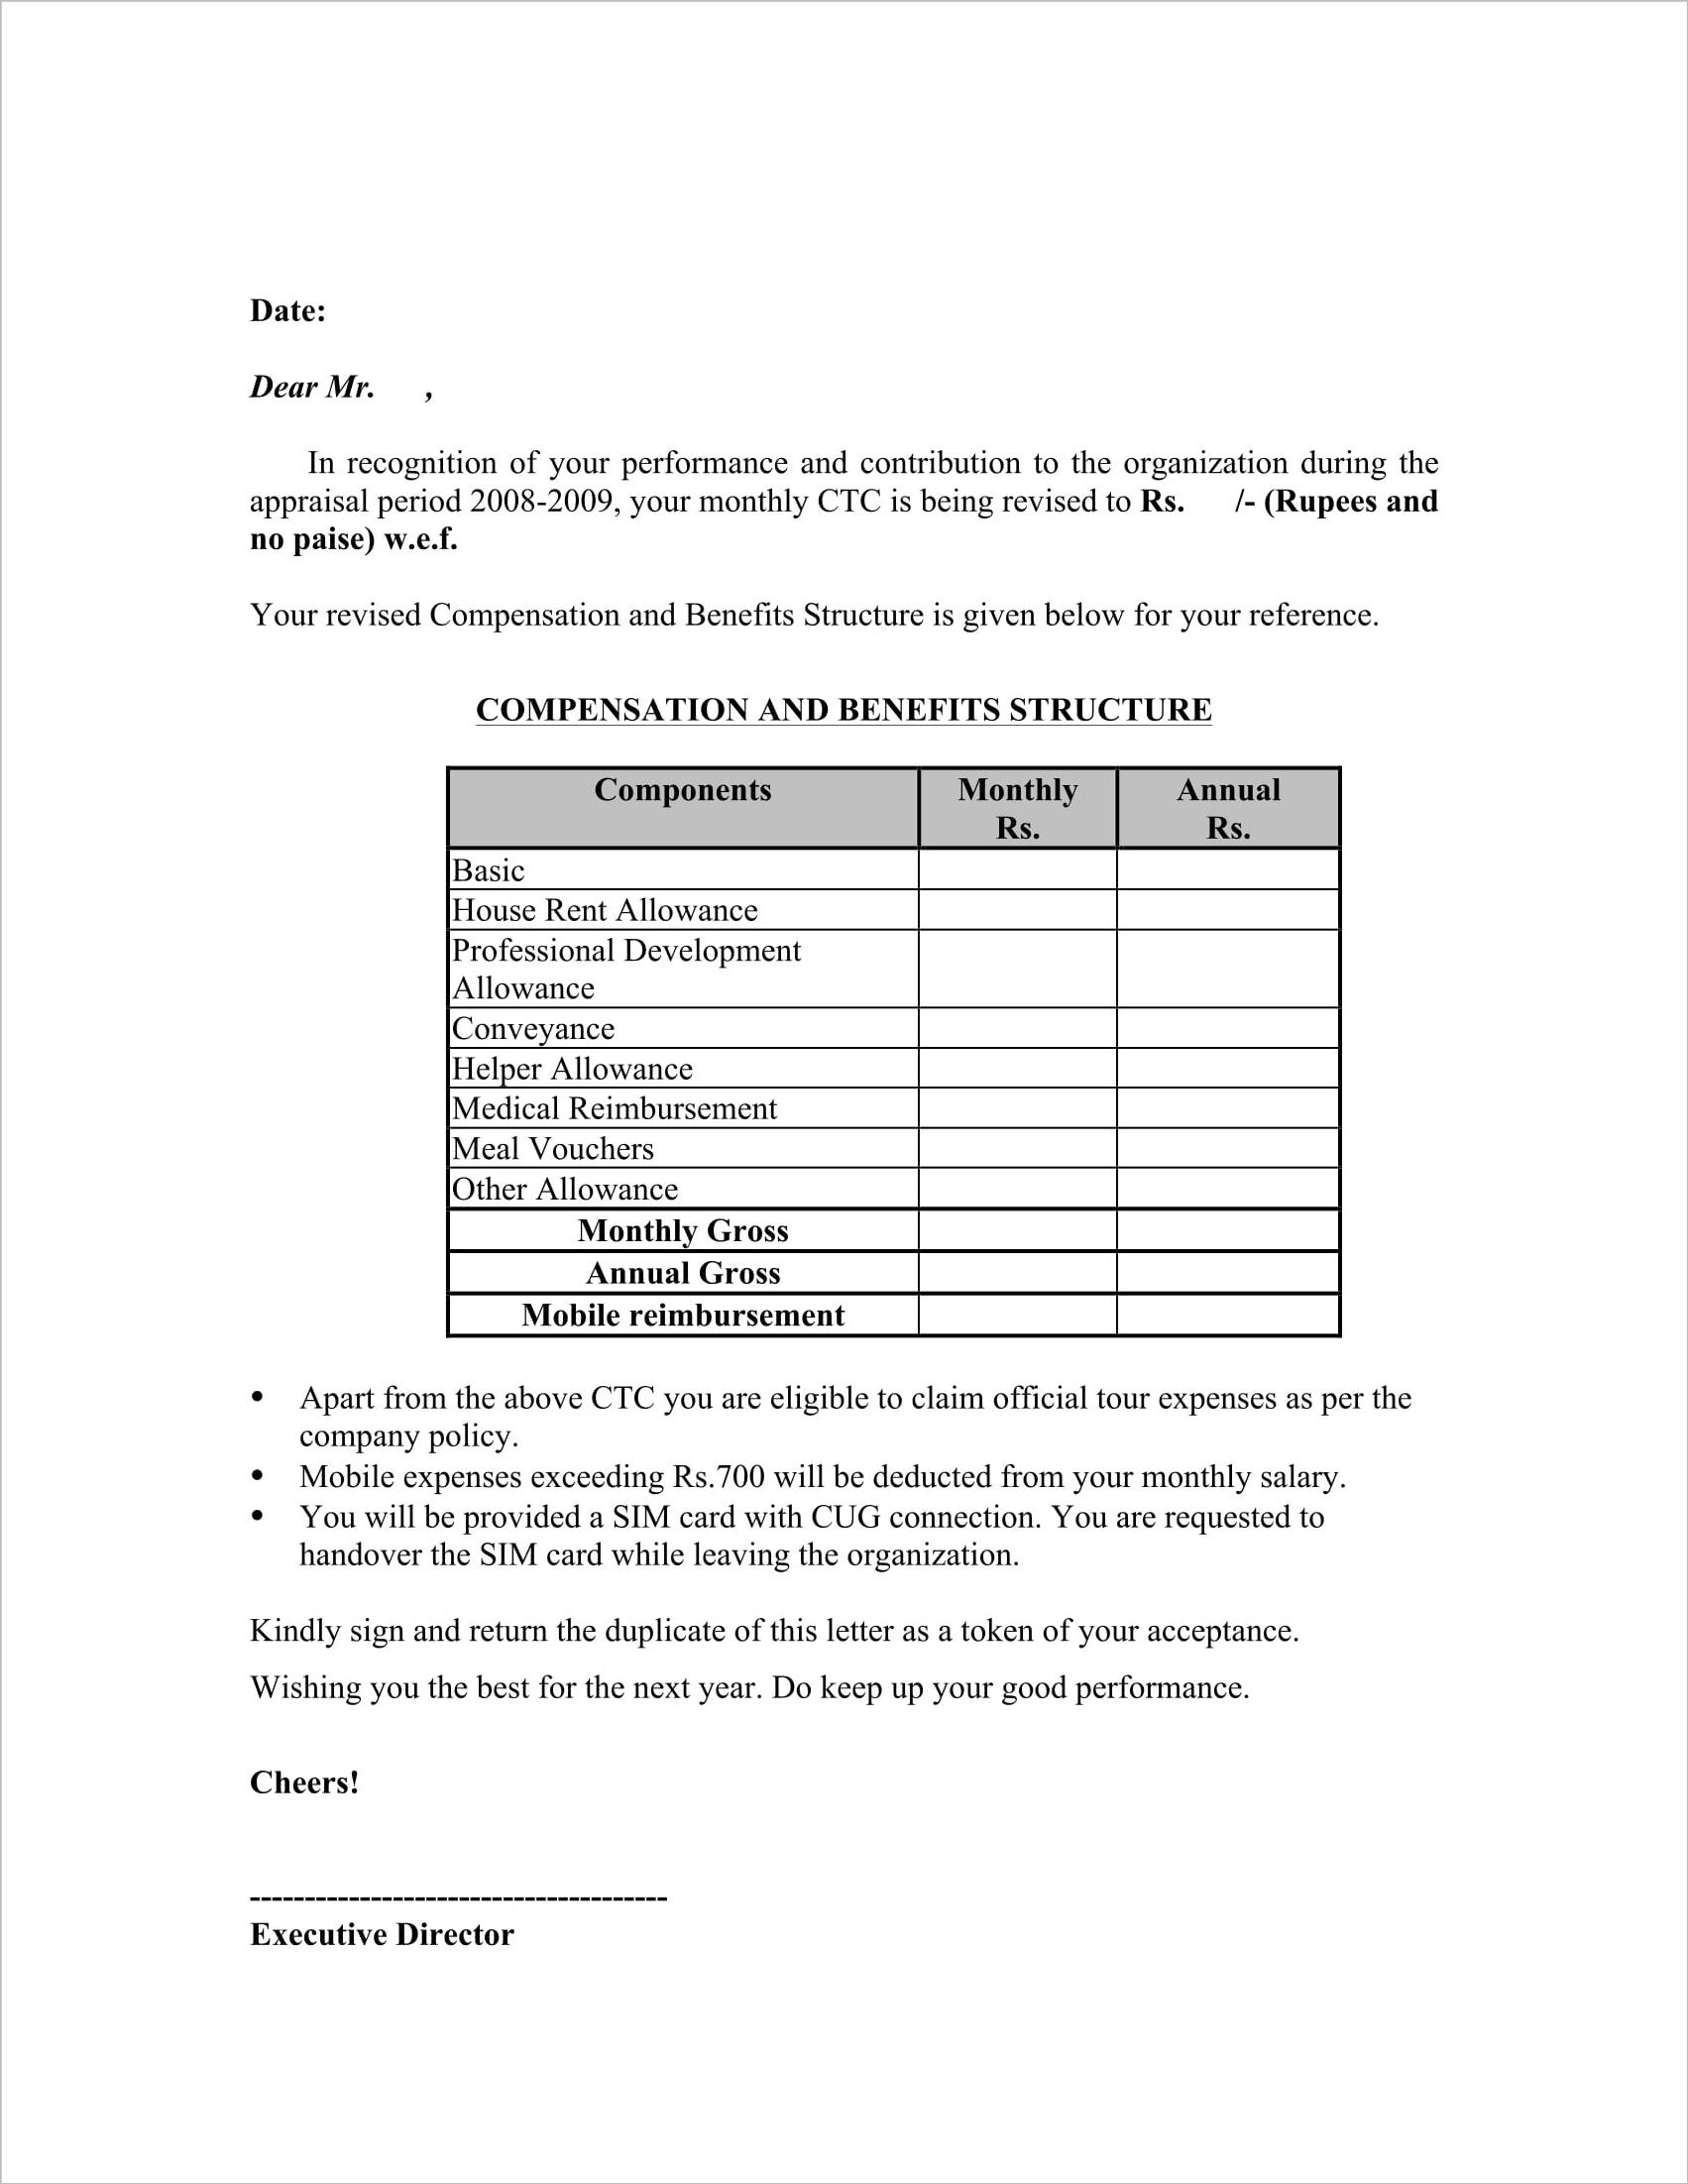 Promotion and salary increment letter format